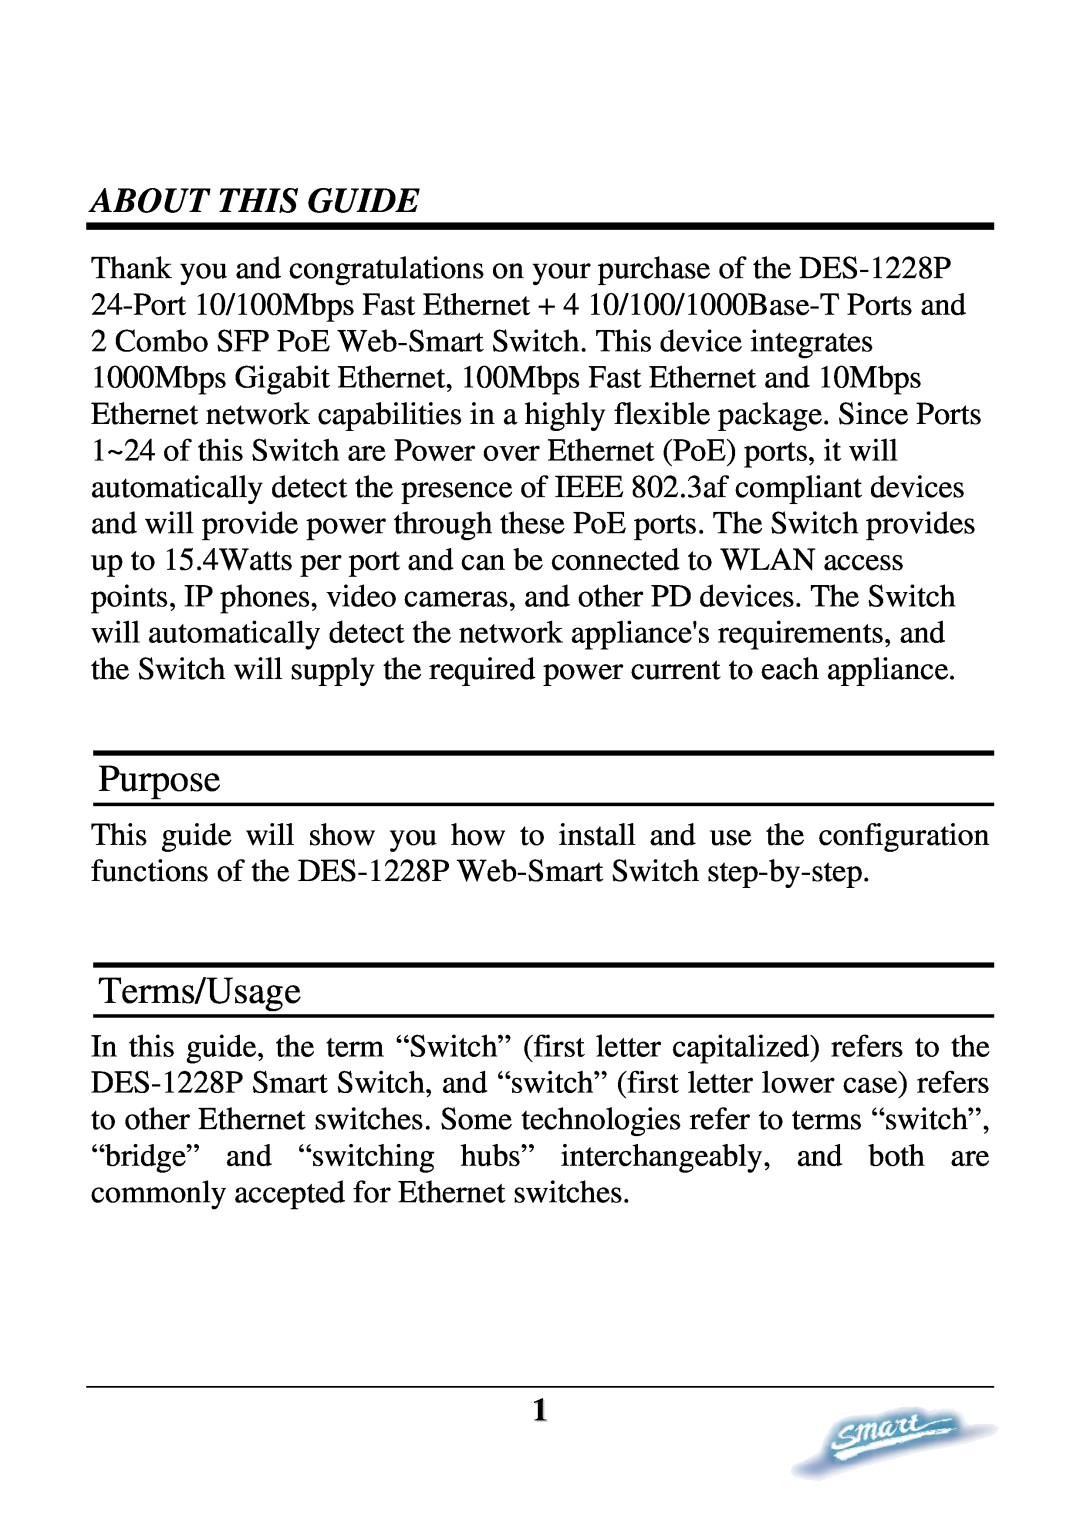 D-Link DES-1228P user manual Purpose, Terms/Usage, About This Guide 